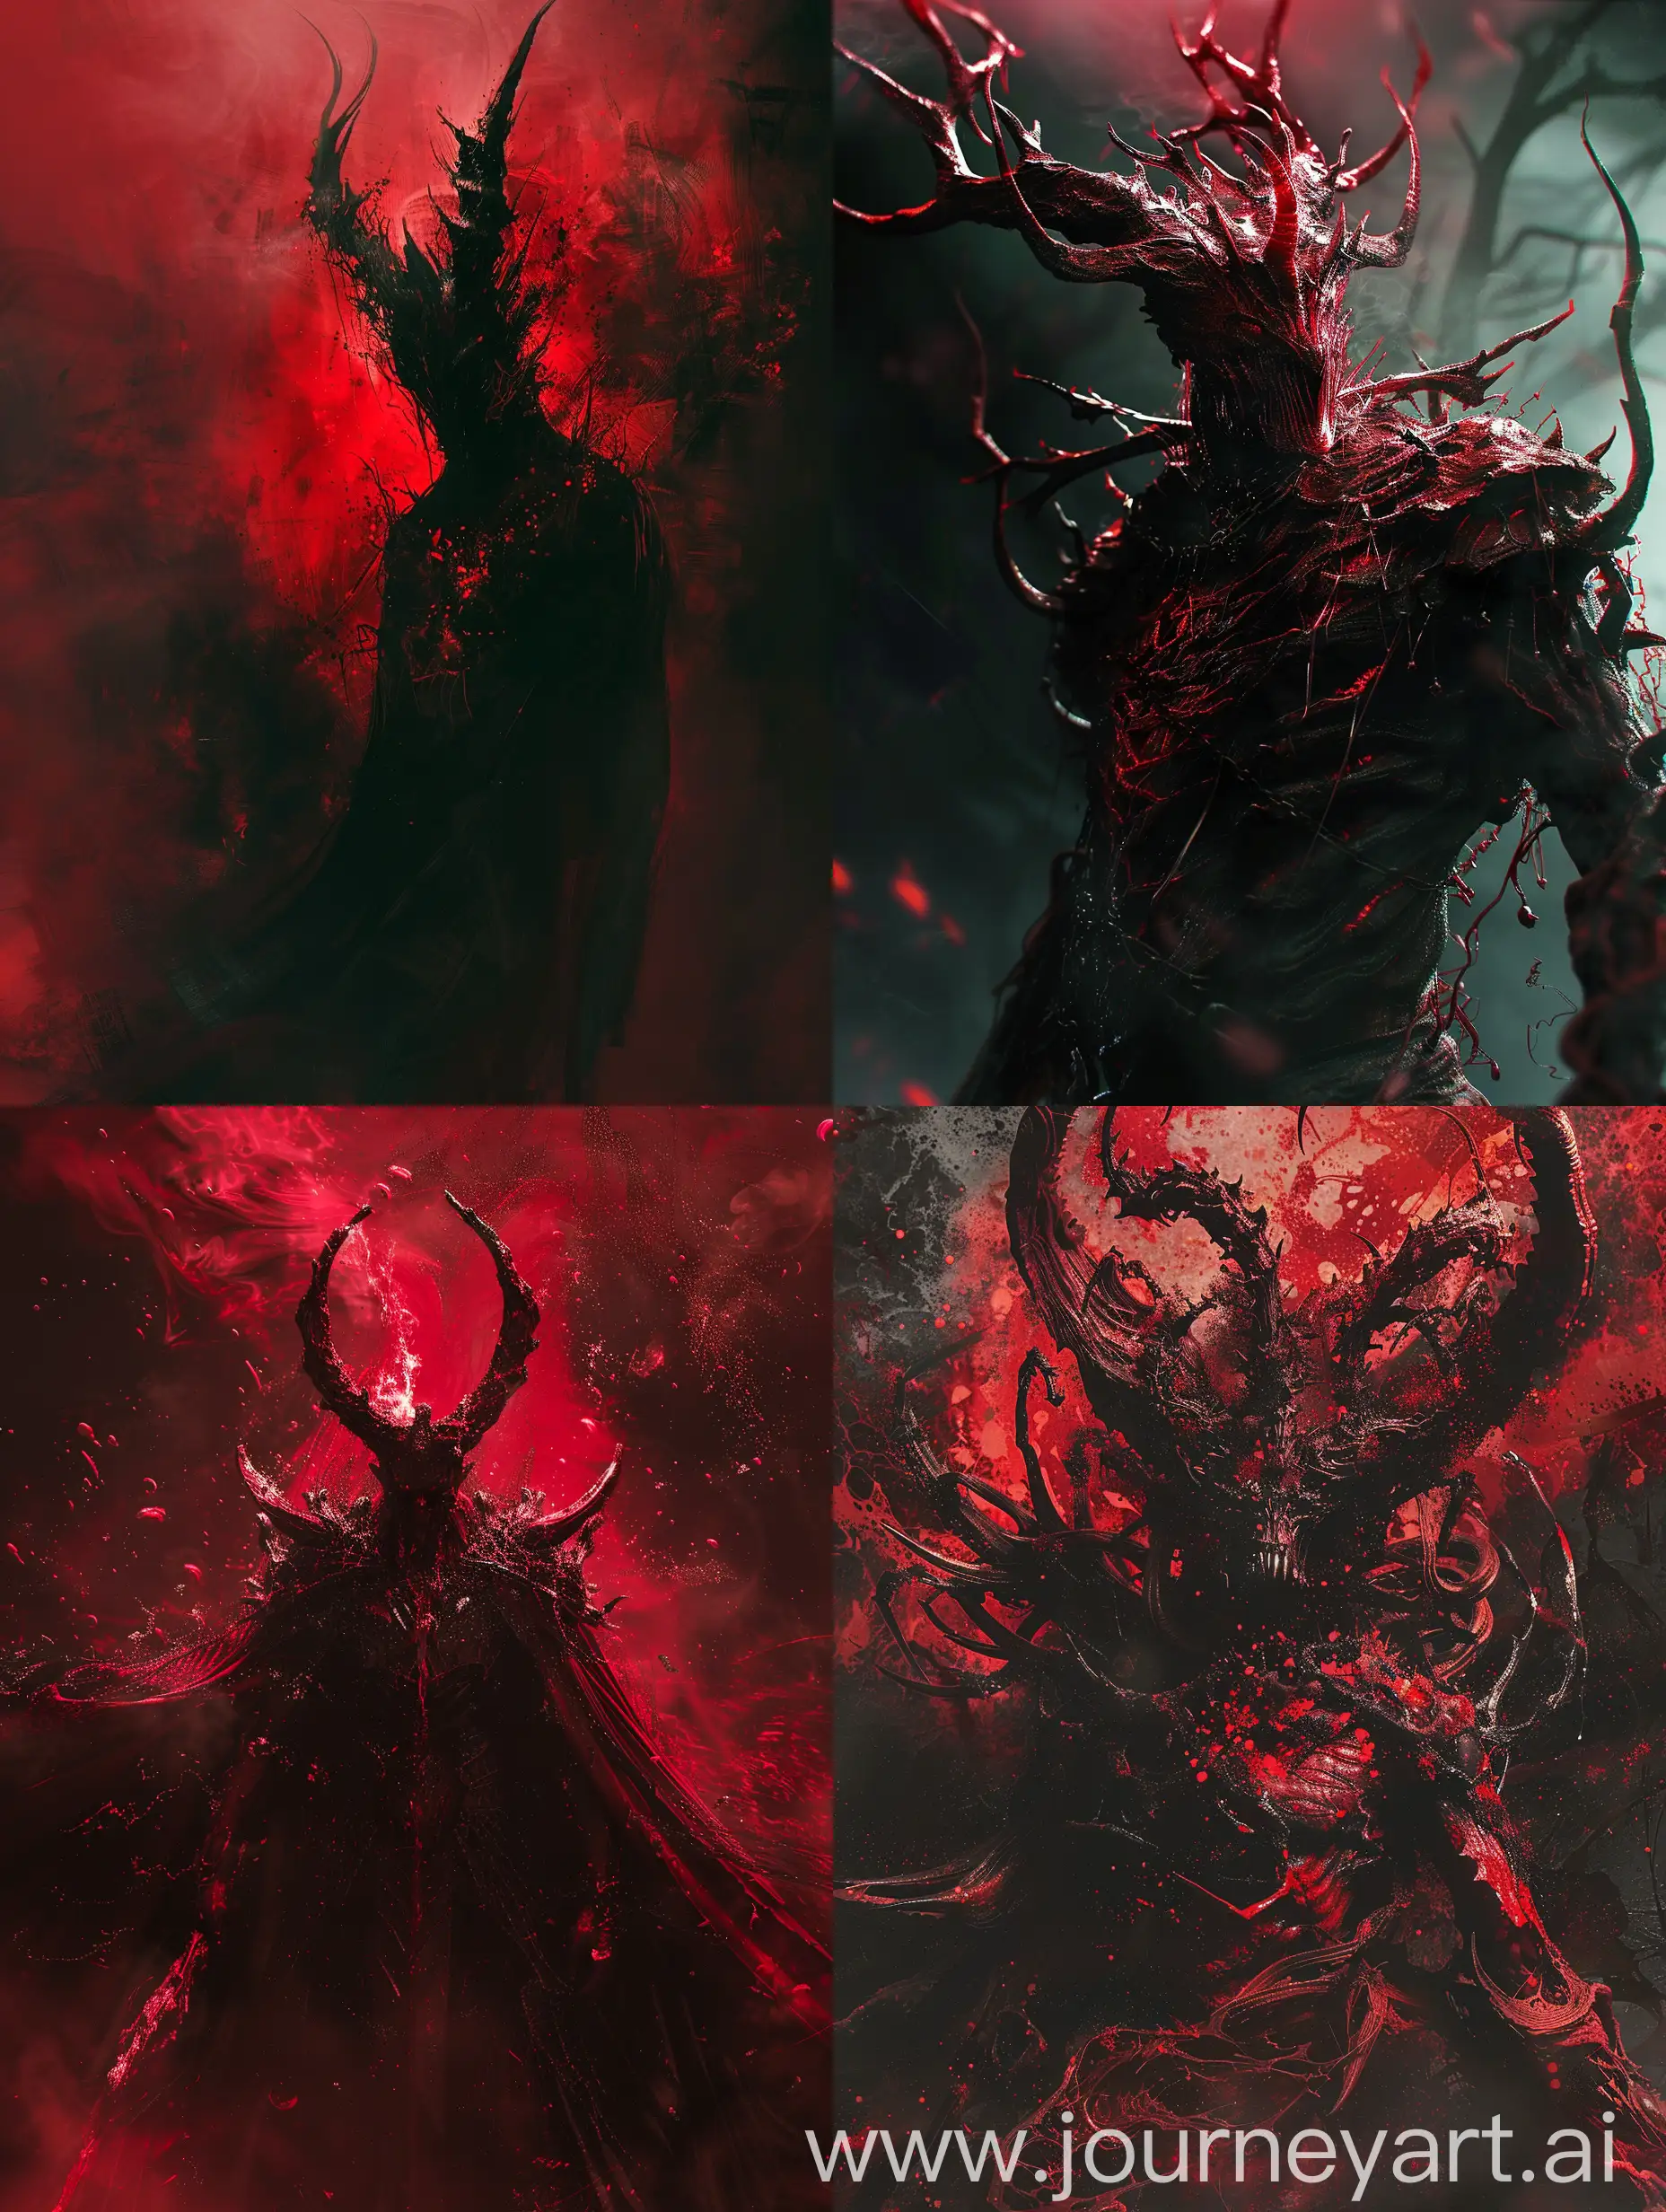 Malevolent-Demon-King-of-the-Outer-Realms-and-Lower-World